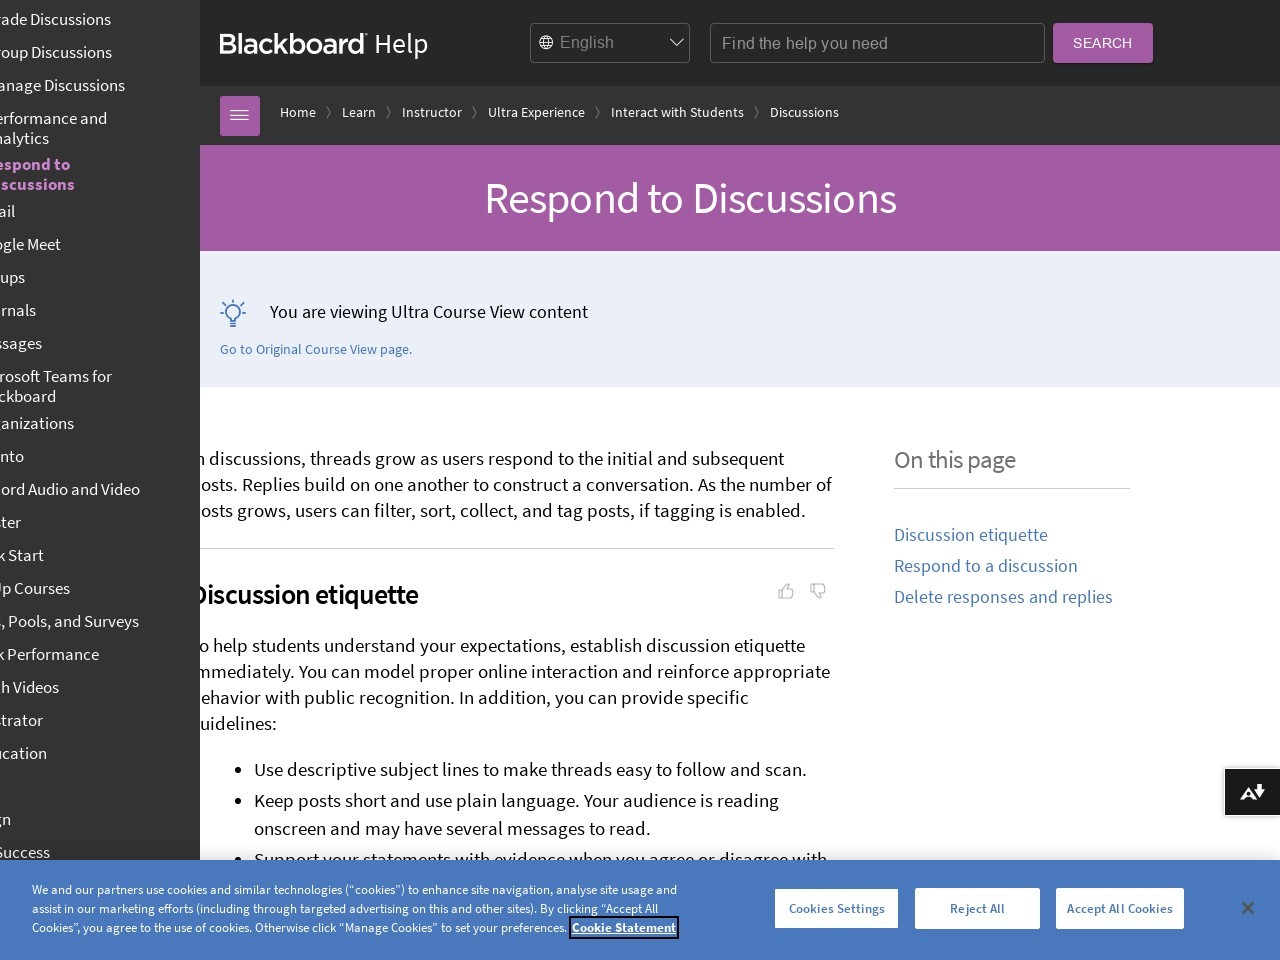 Respond to Discussions | Blackboard Help